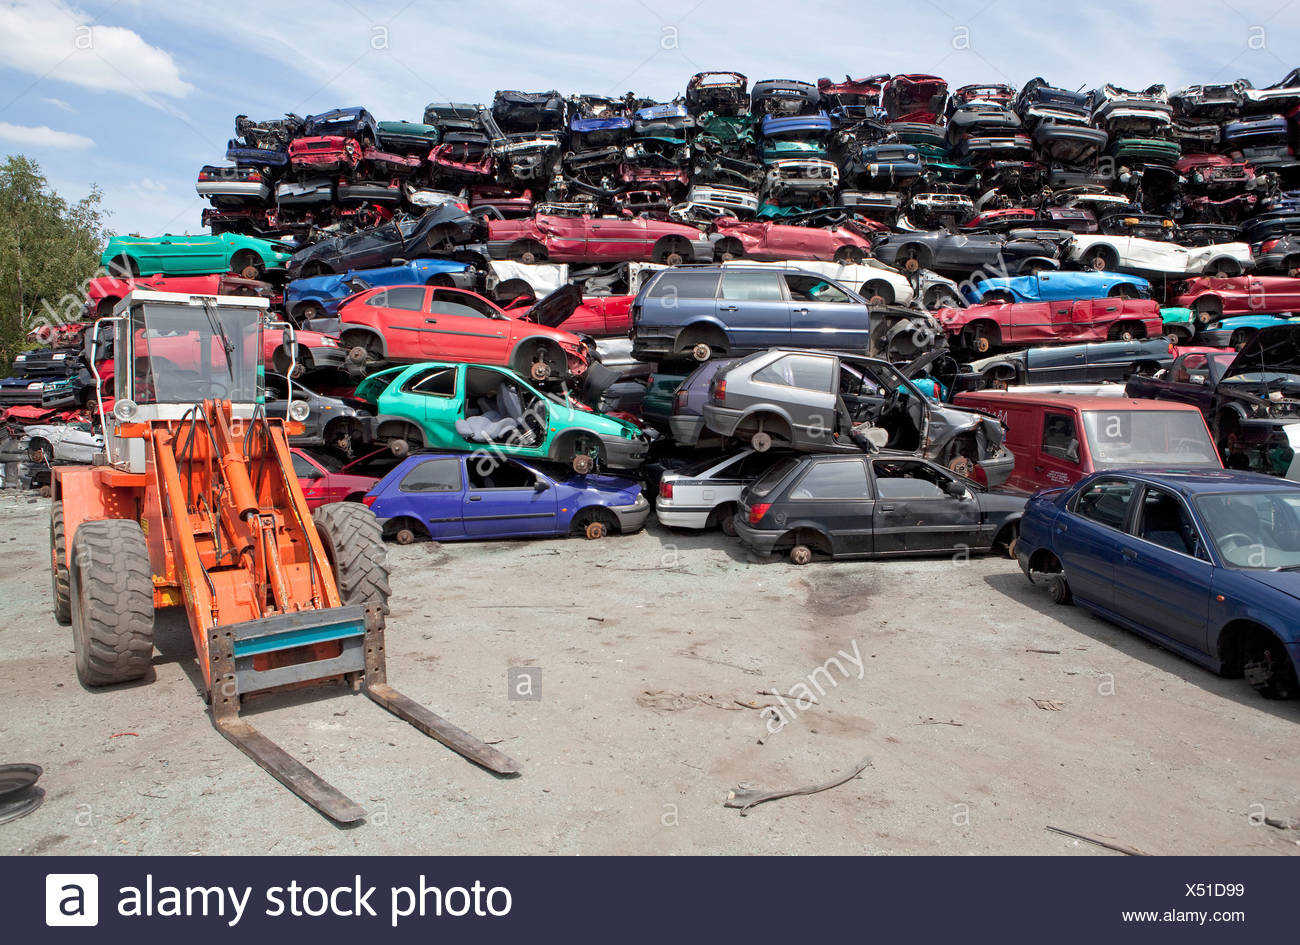 Ruhr Germany A Forklift In Front Of A Car On A Mountain Junkyard Stock Photo Alamy